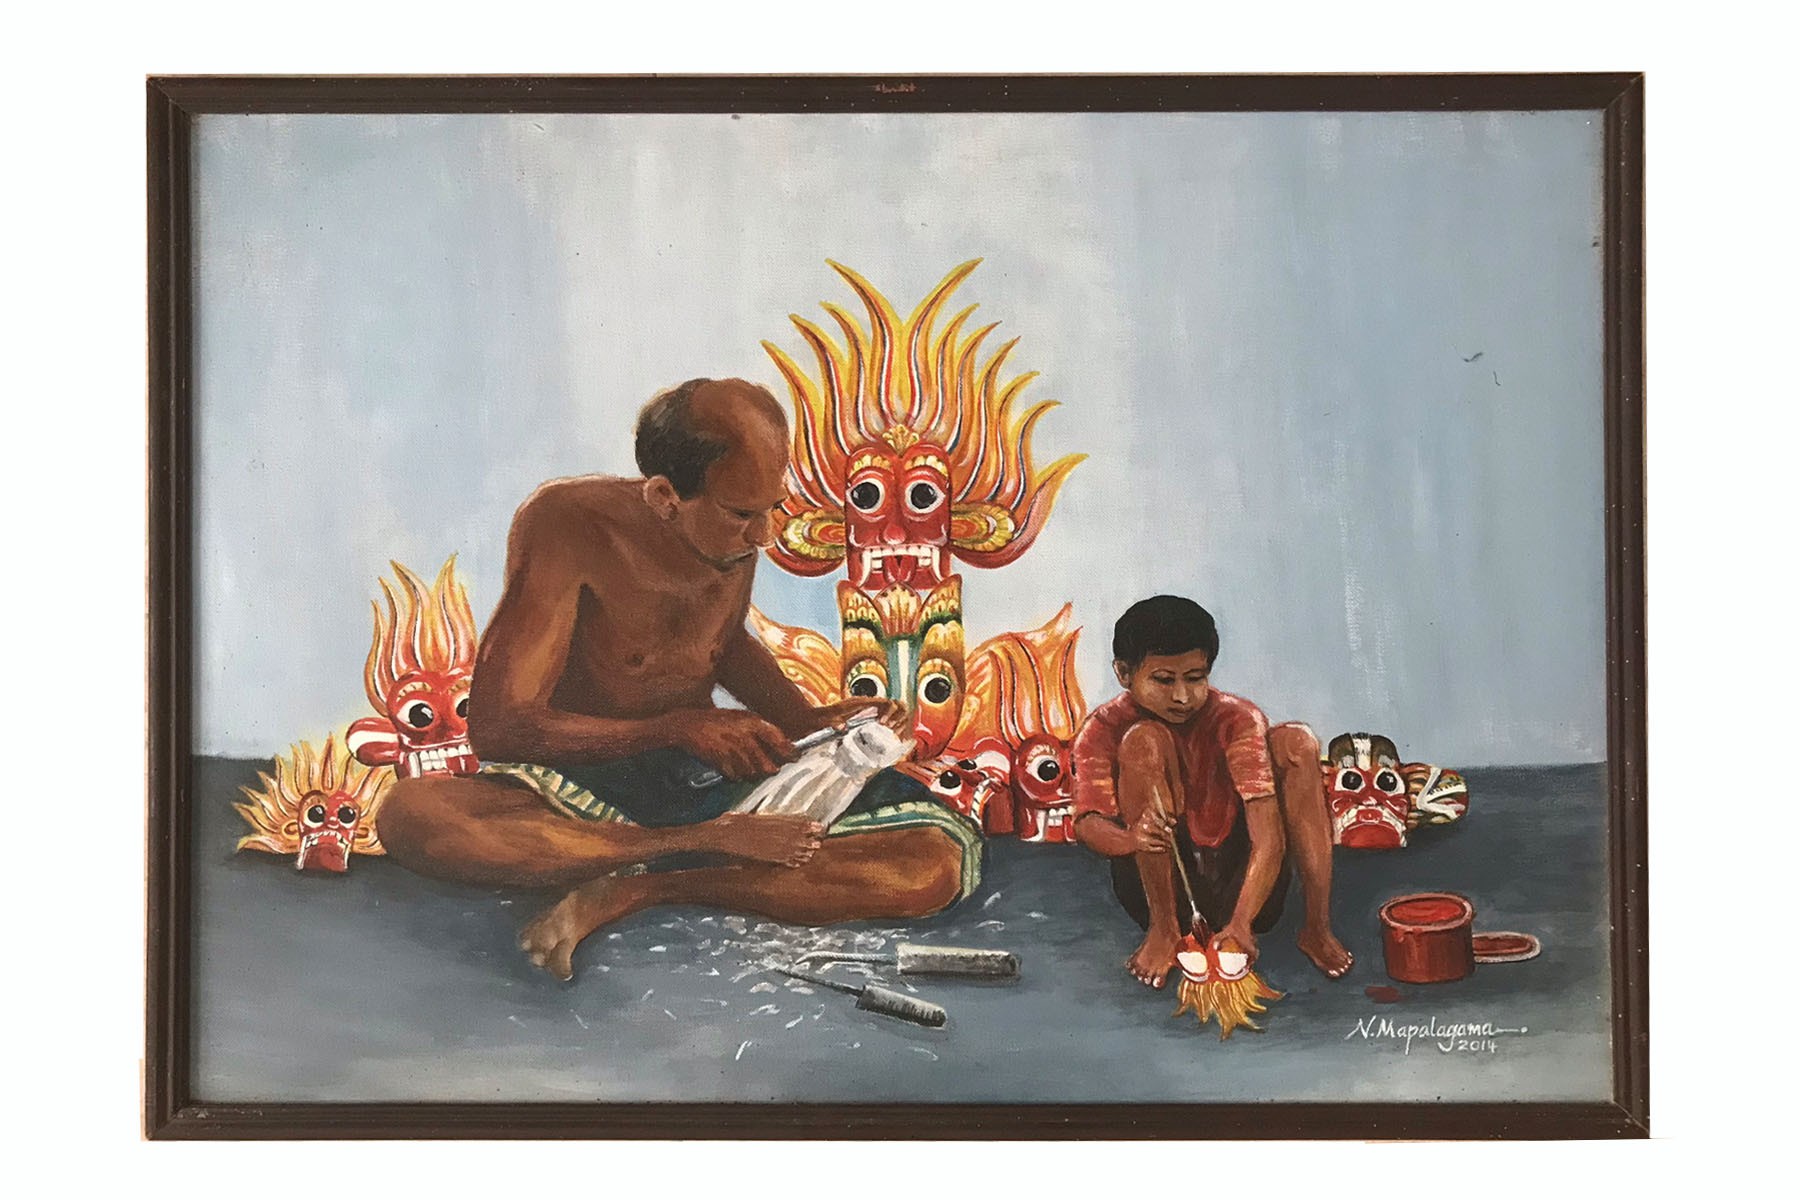 A Man Carving Masks (Canvas) by H Mapalagama